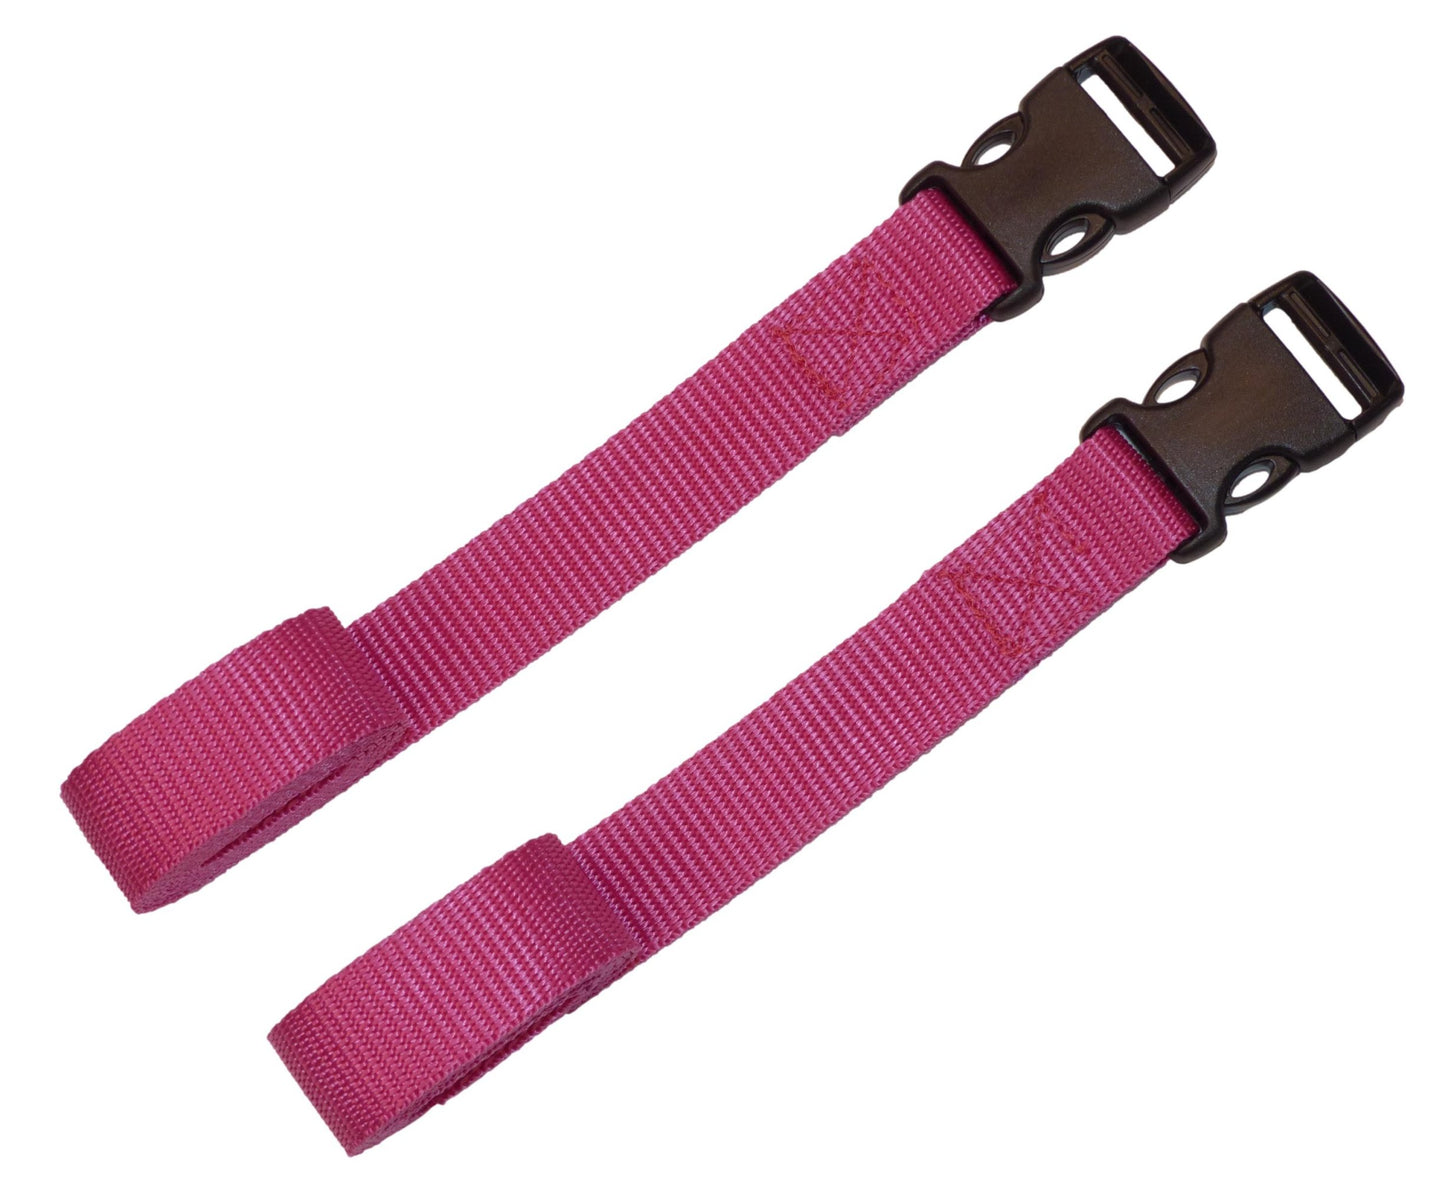 Benristraps 25mm Webbing Strap with Quick Release Buckle (Pair)